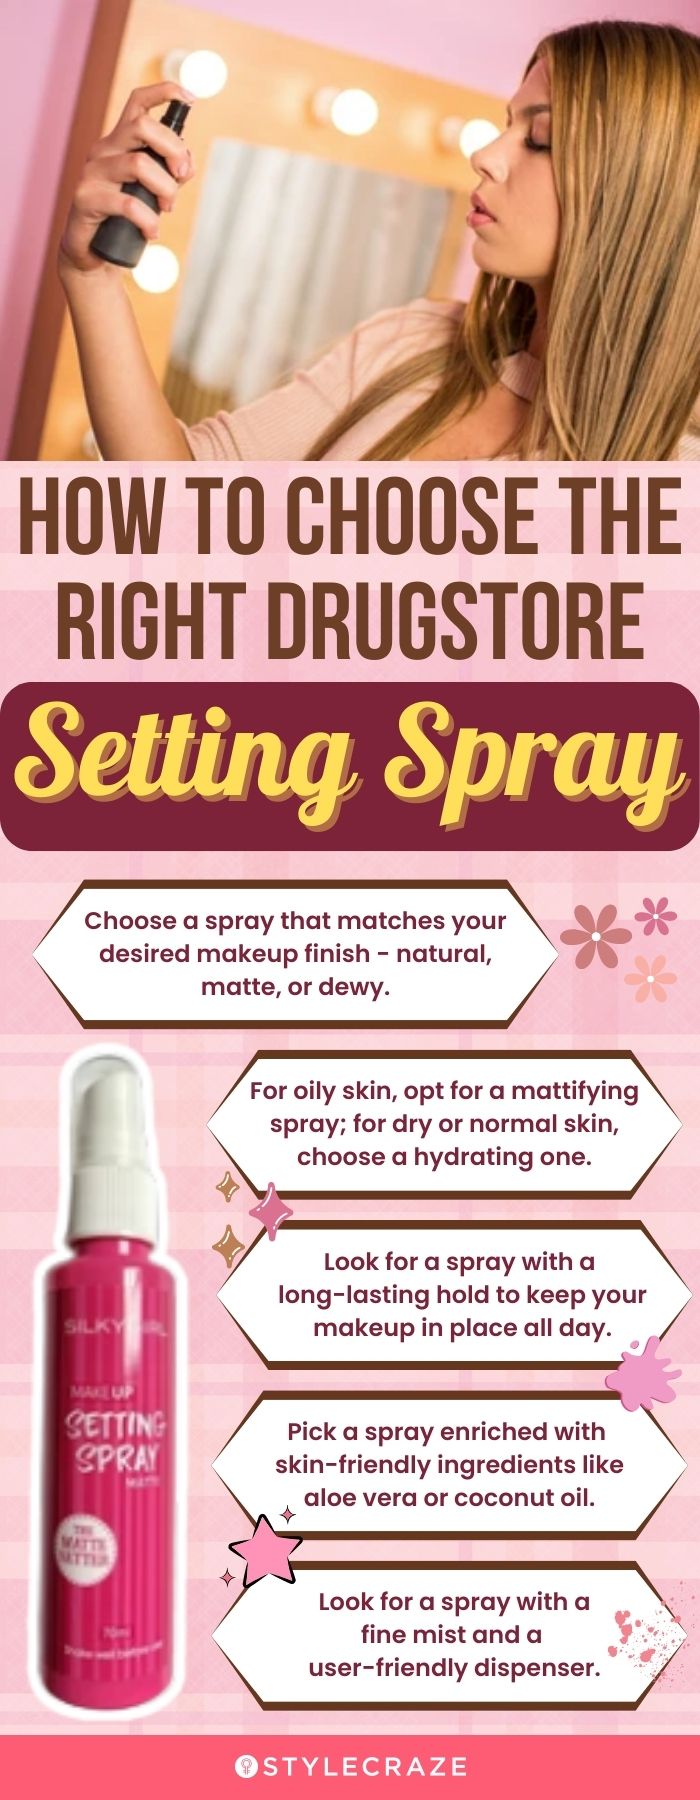 How To Choose The Right Drugstore Setting Spray (infographic)